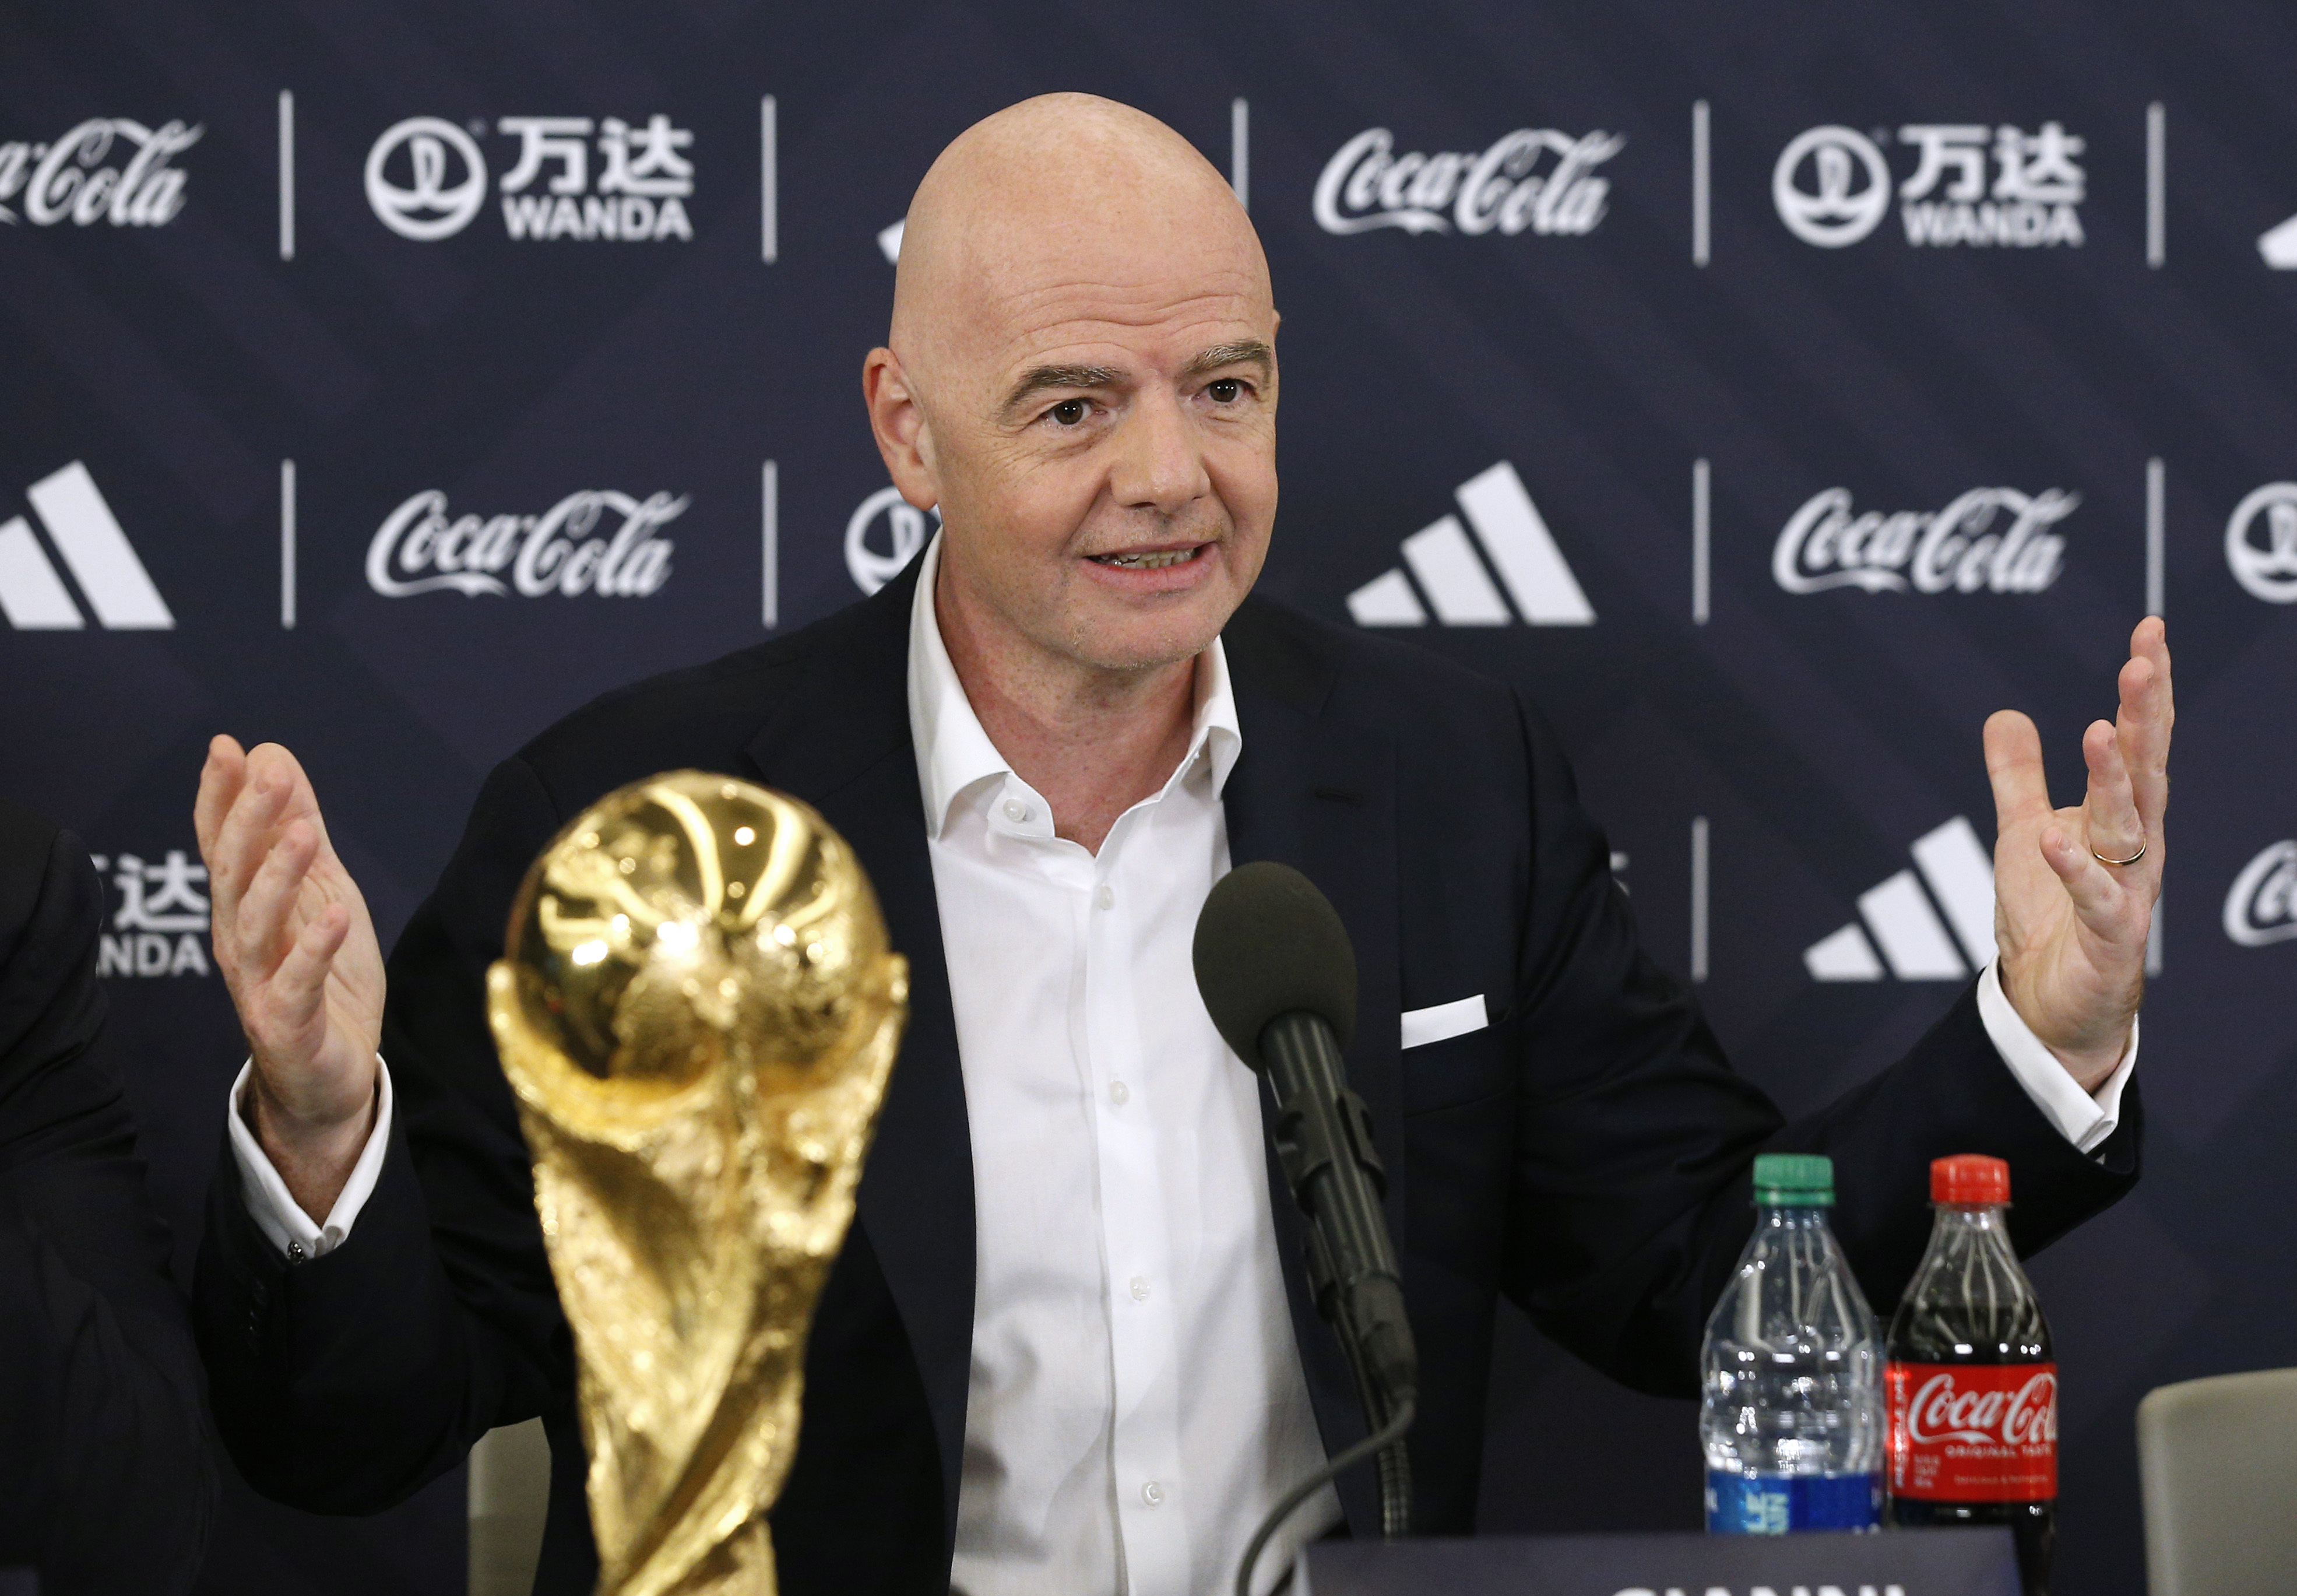 2030 World Cup to take place on 3 continents for first time